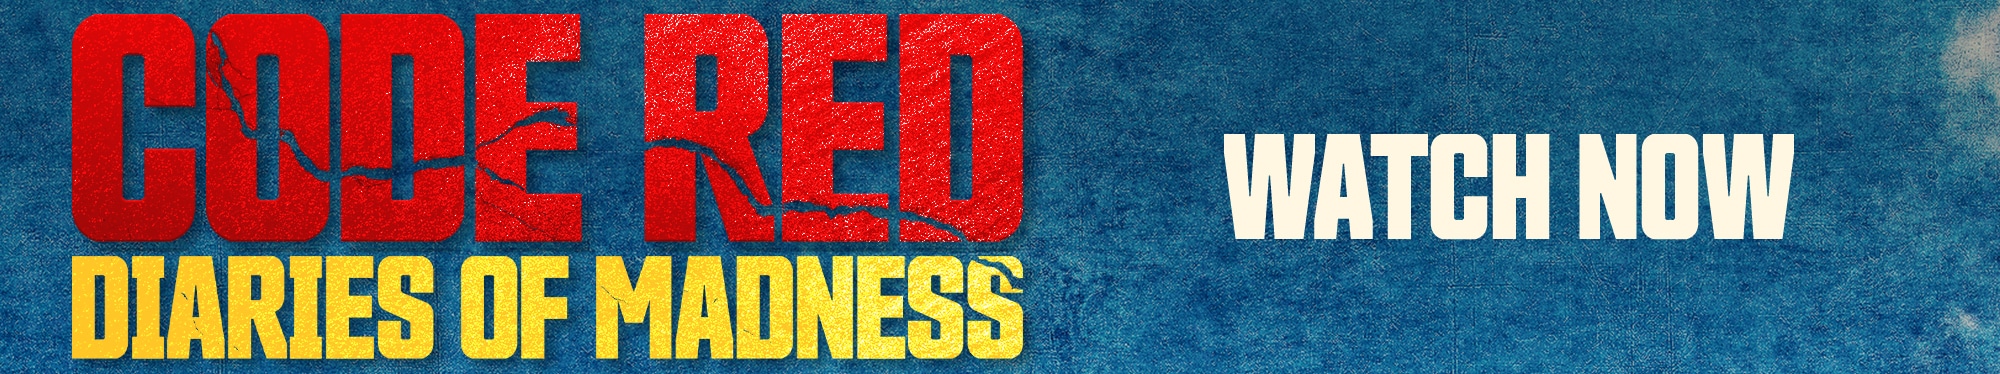 Code Red Diaries Of Madness Watch Now